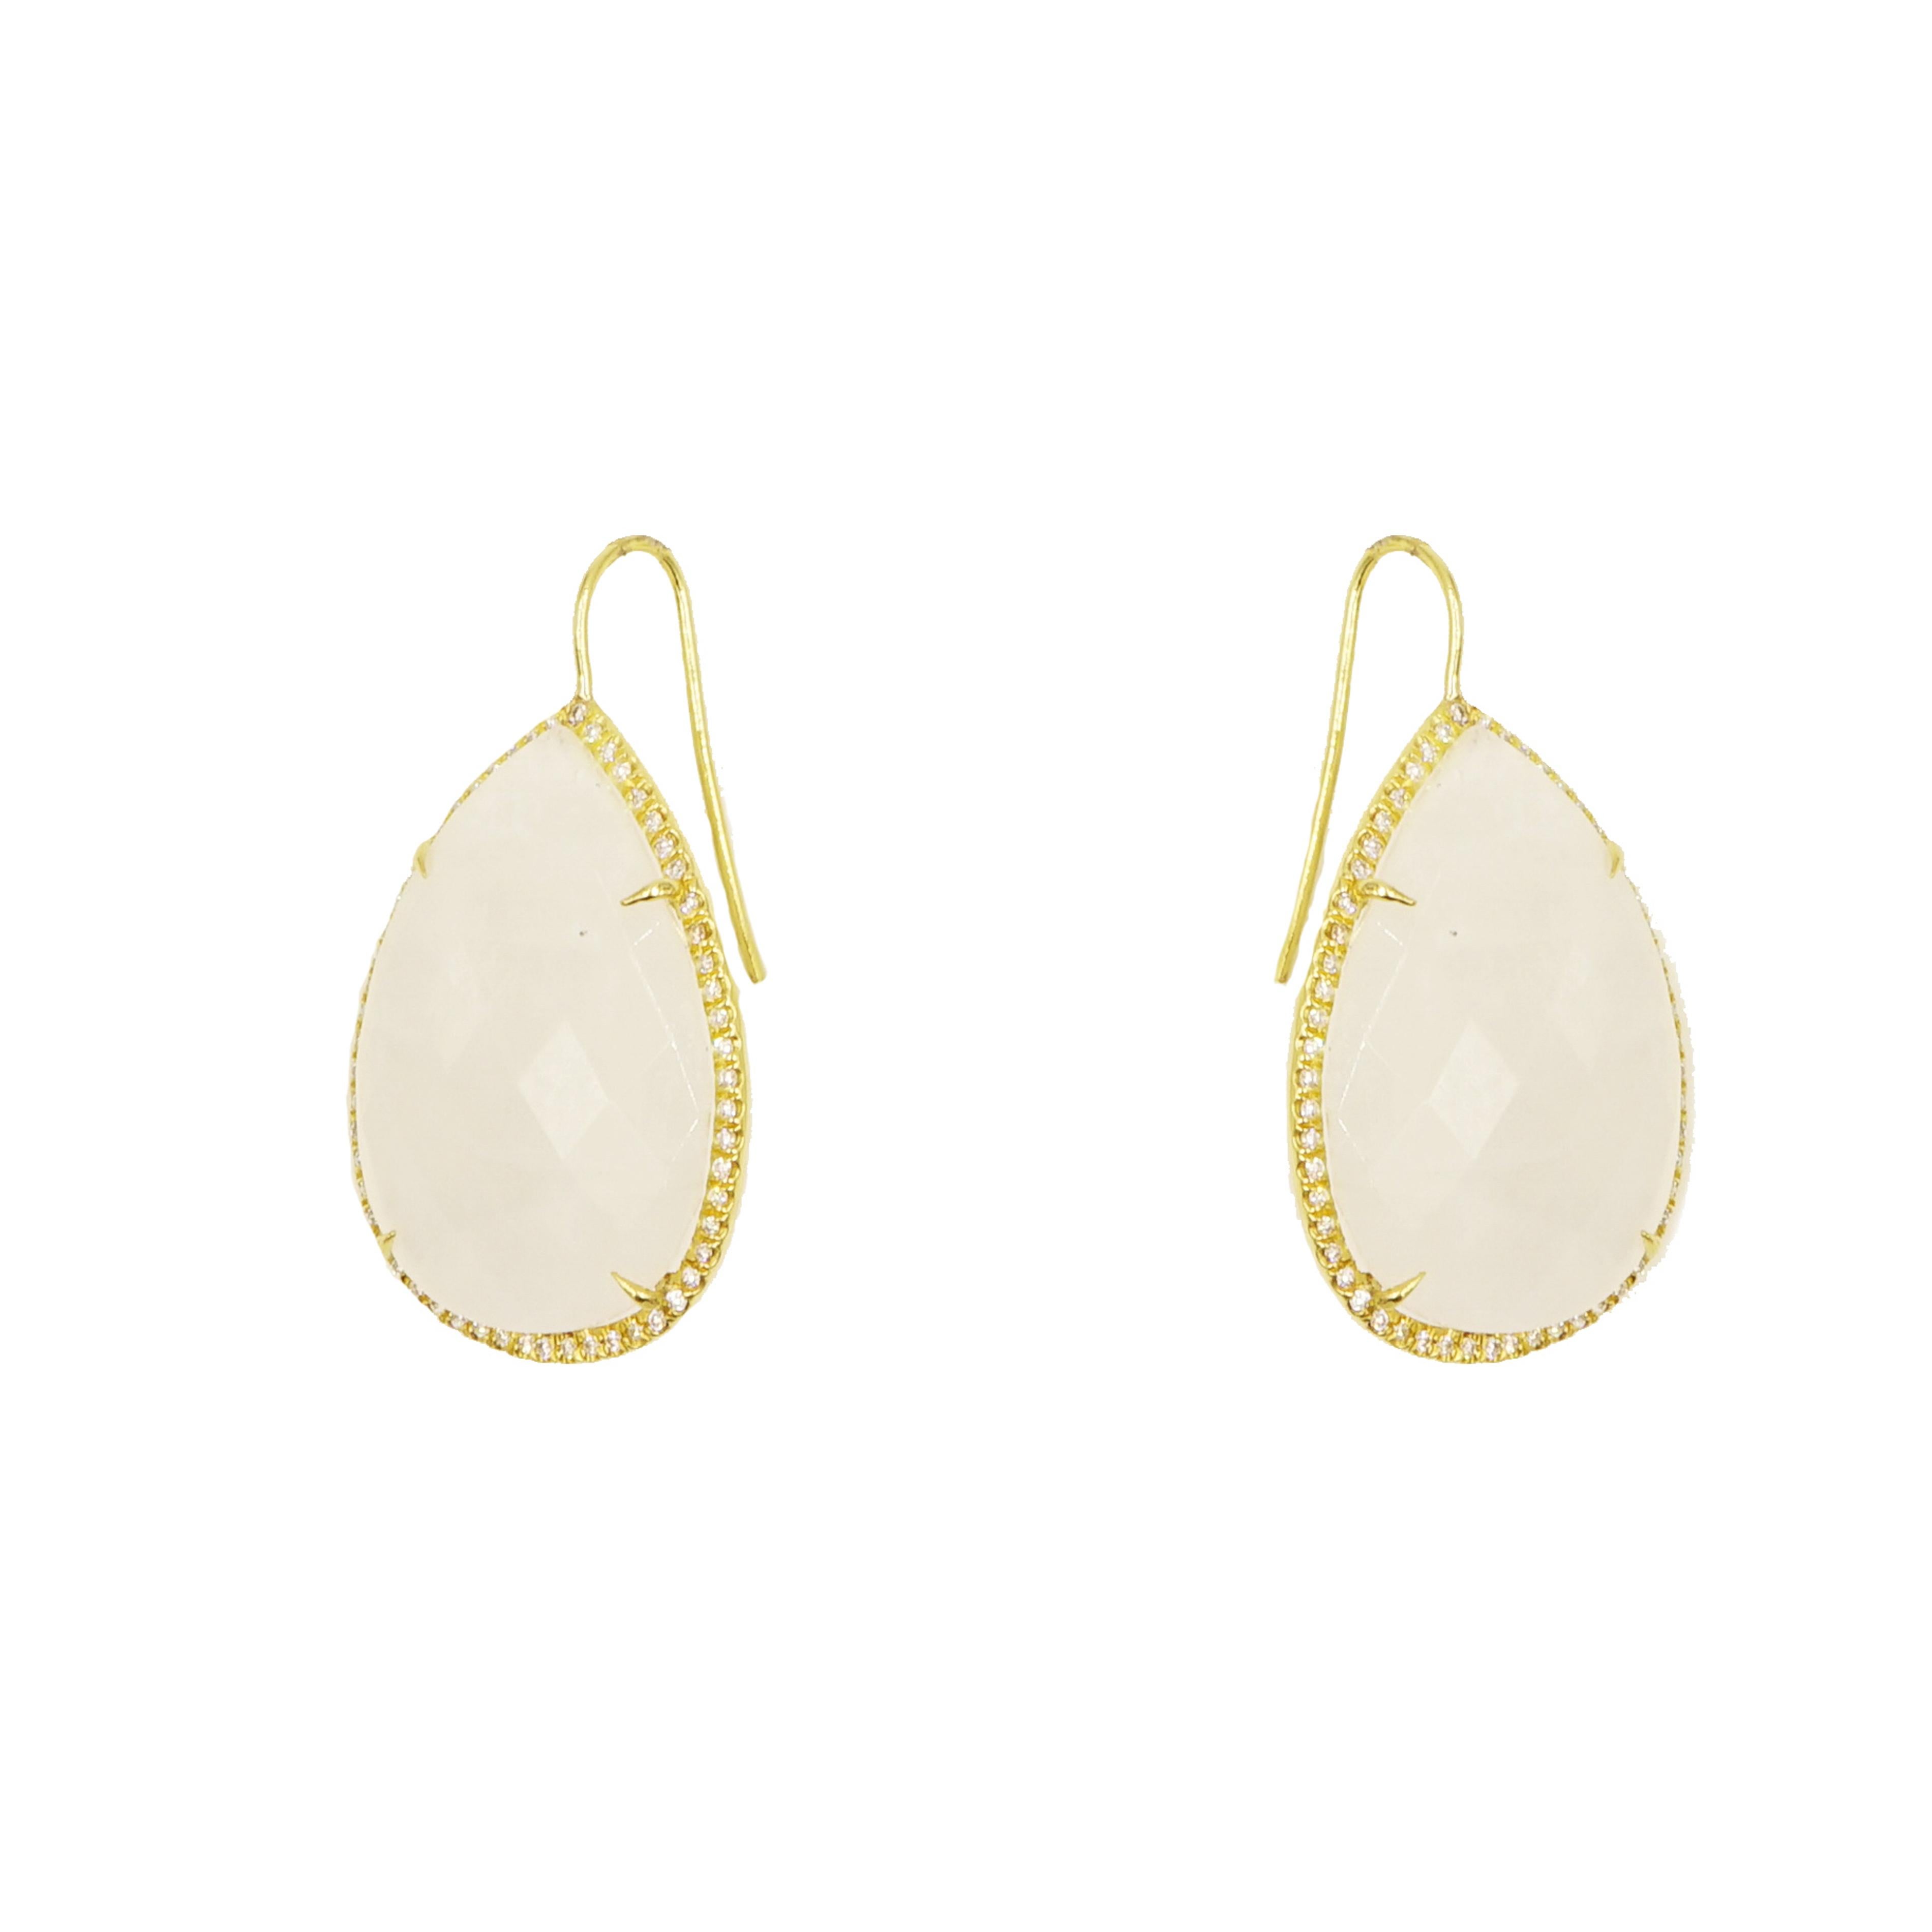 Step up any summer look with this earring. The style elongates the face and is extremely on-trend for the season. Looking for muted shades and simple drops that graze the shoulder and add sparkle... Look no further, this is it!! 
Absolutely